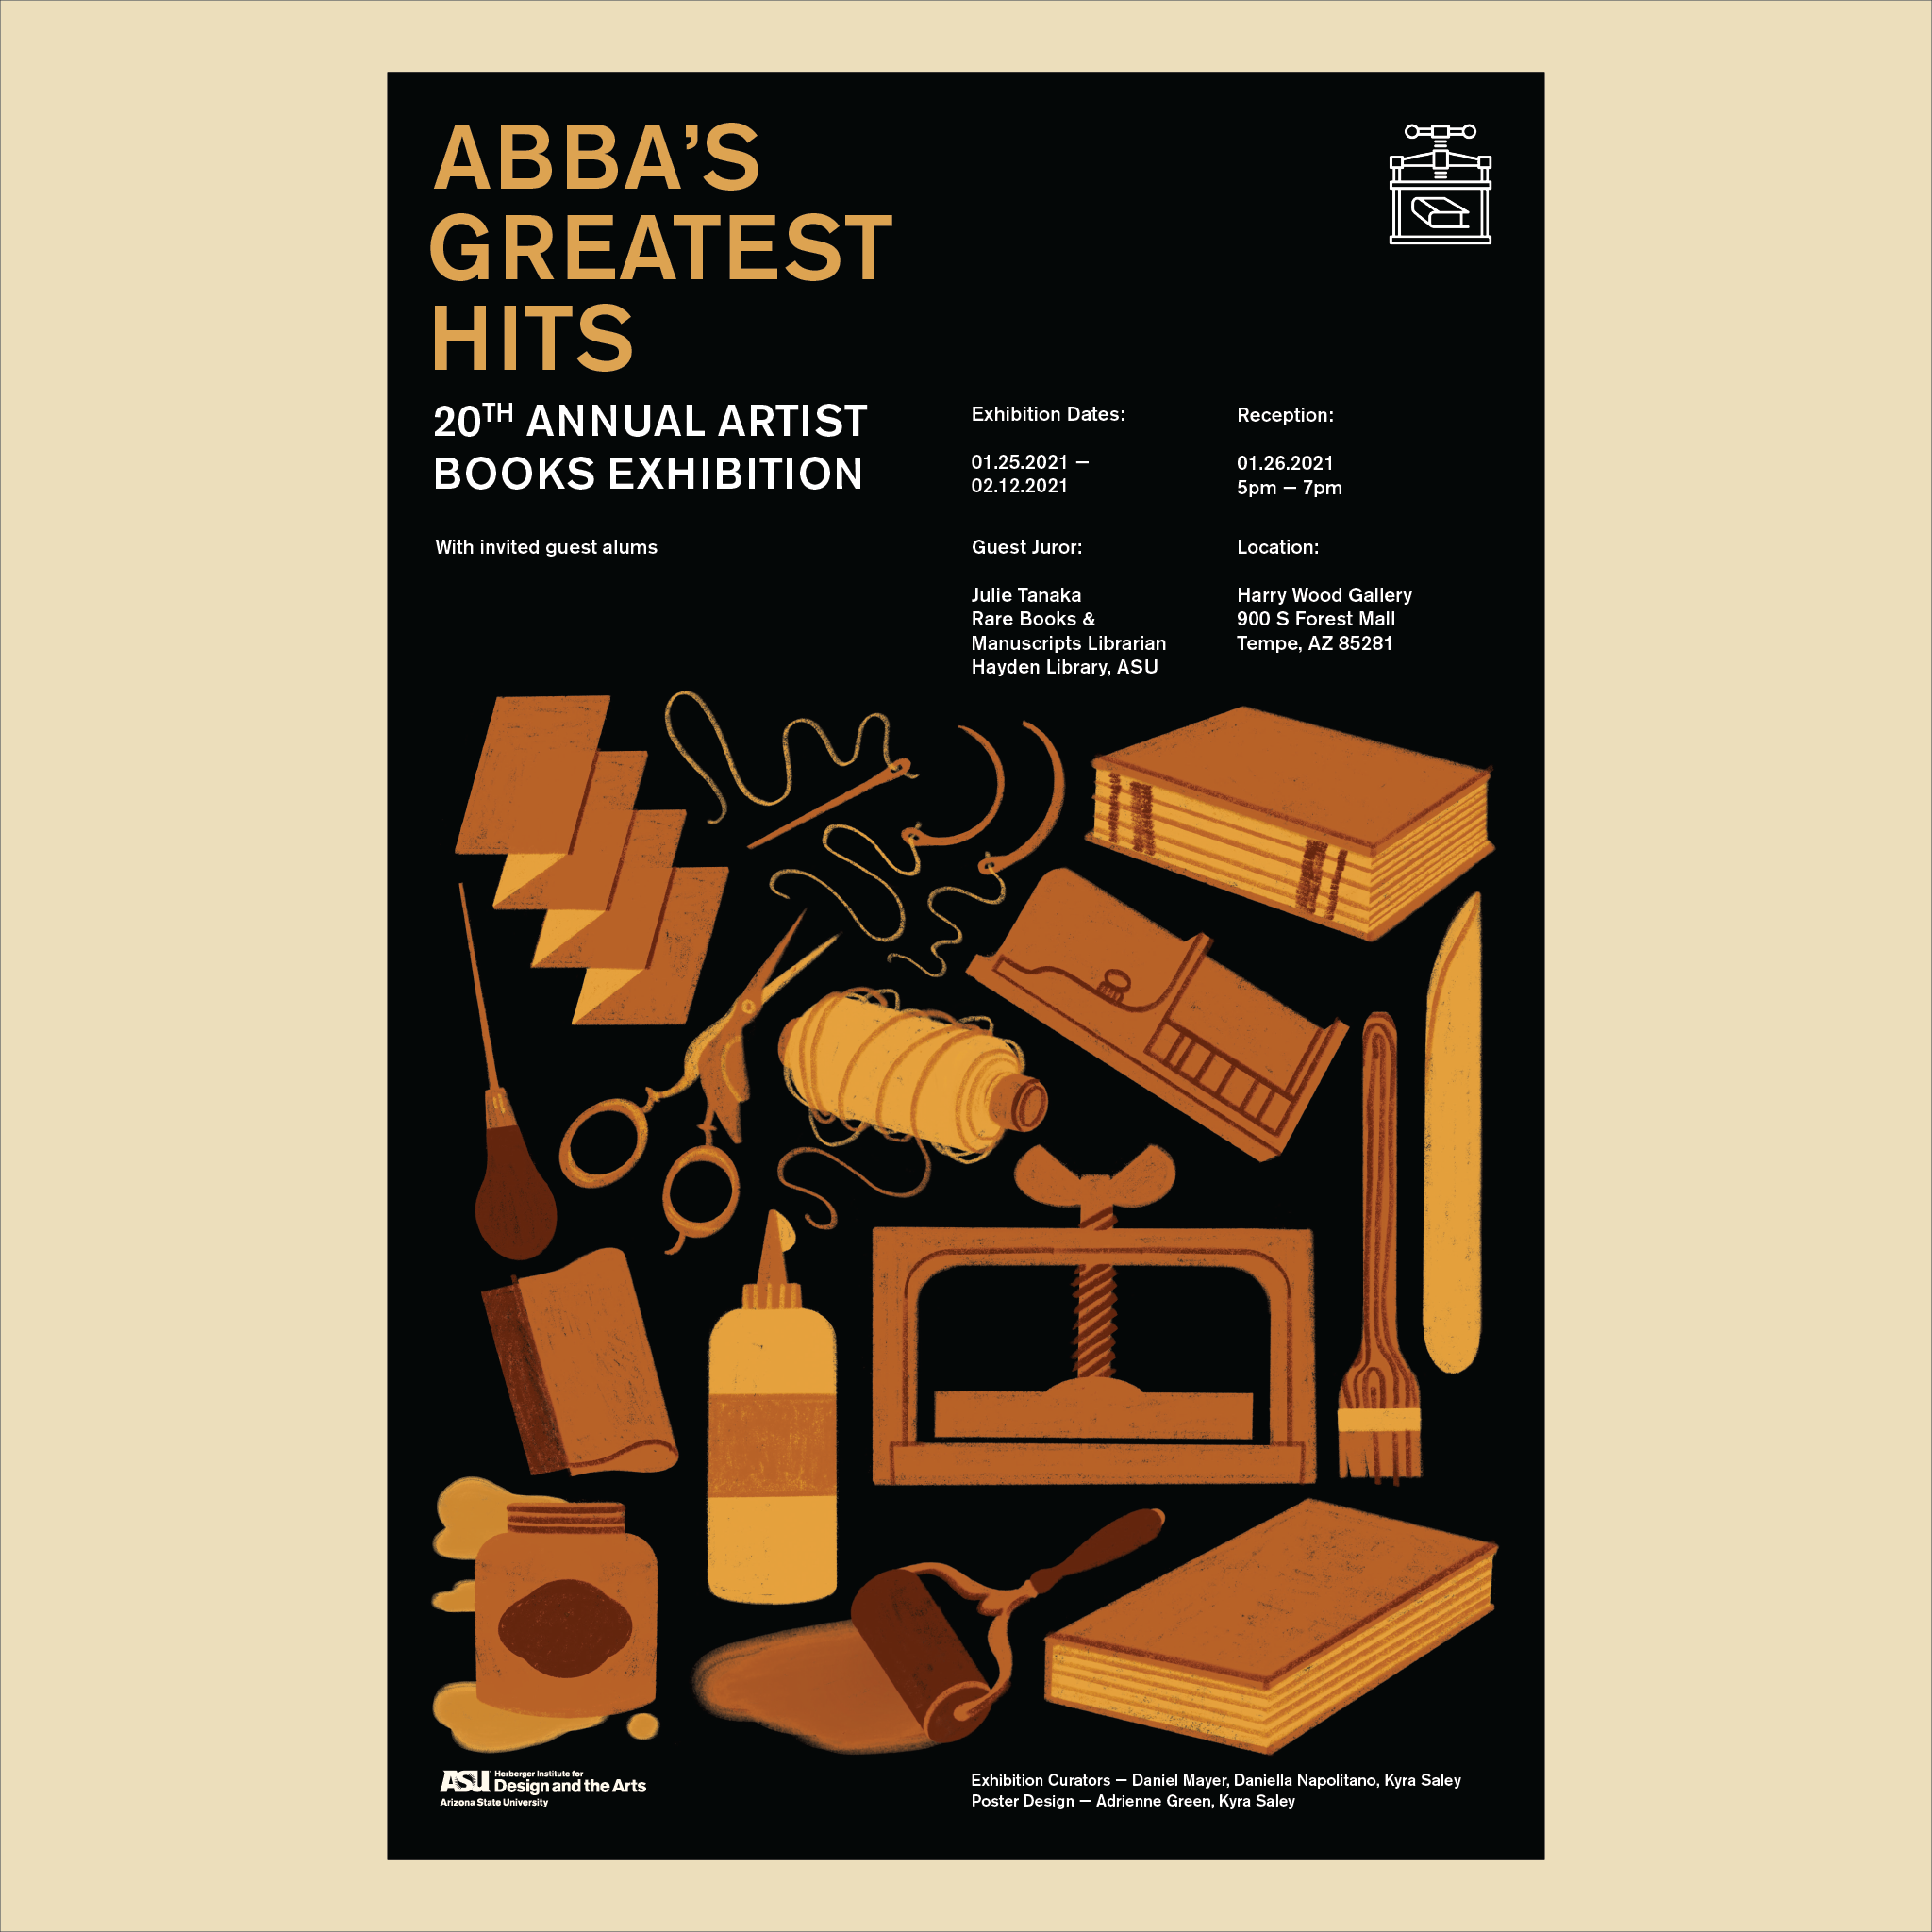 ABBA's Greatest Hits, 20th Anniversary Exhibition